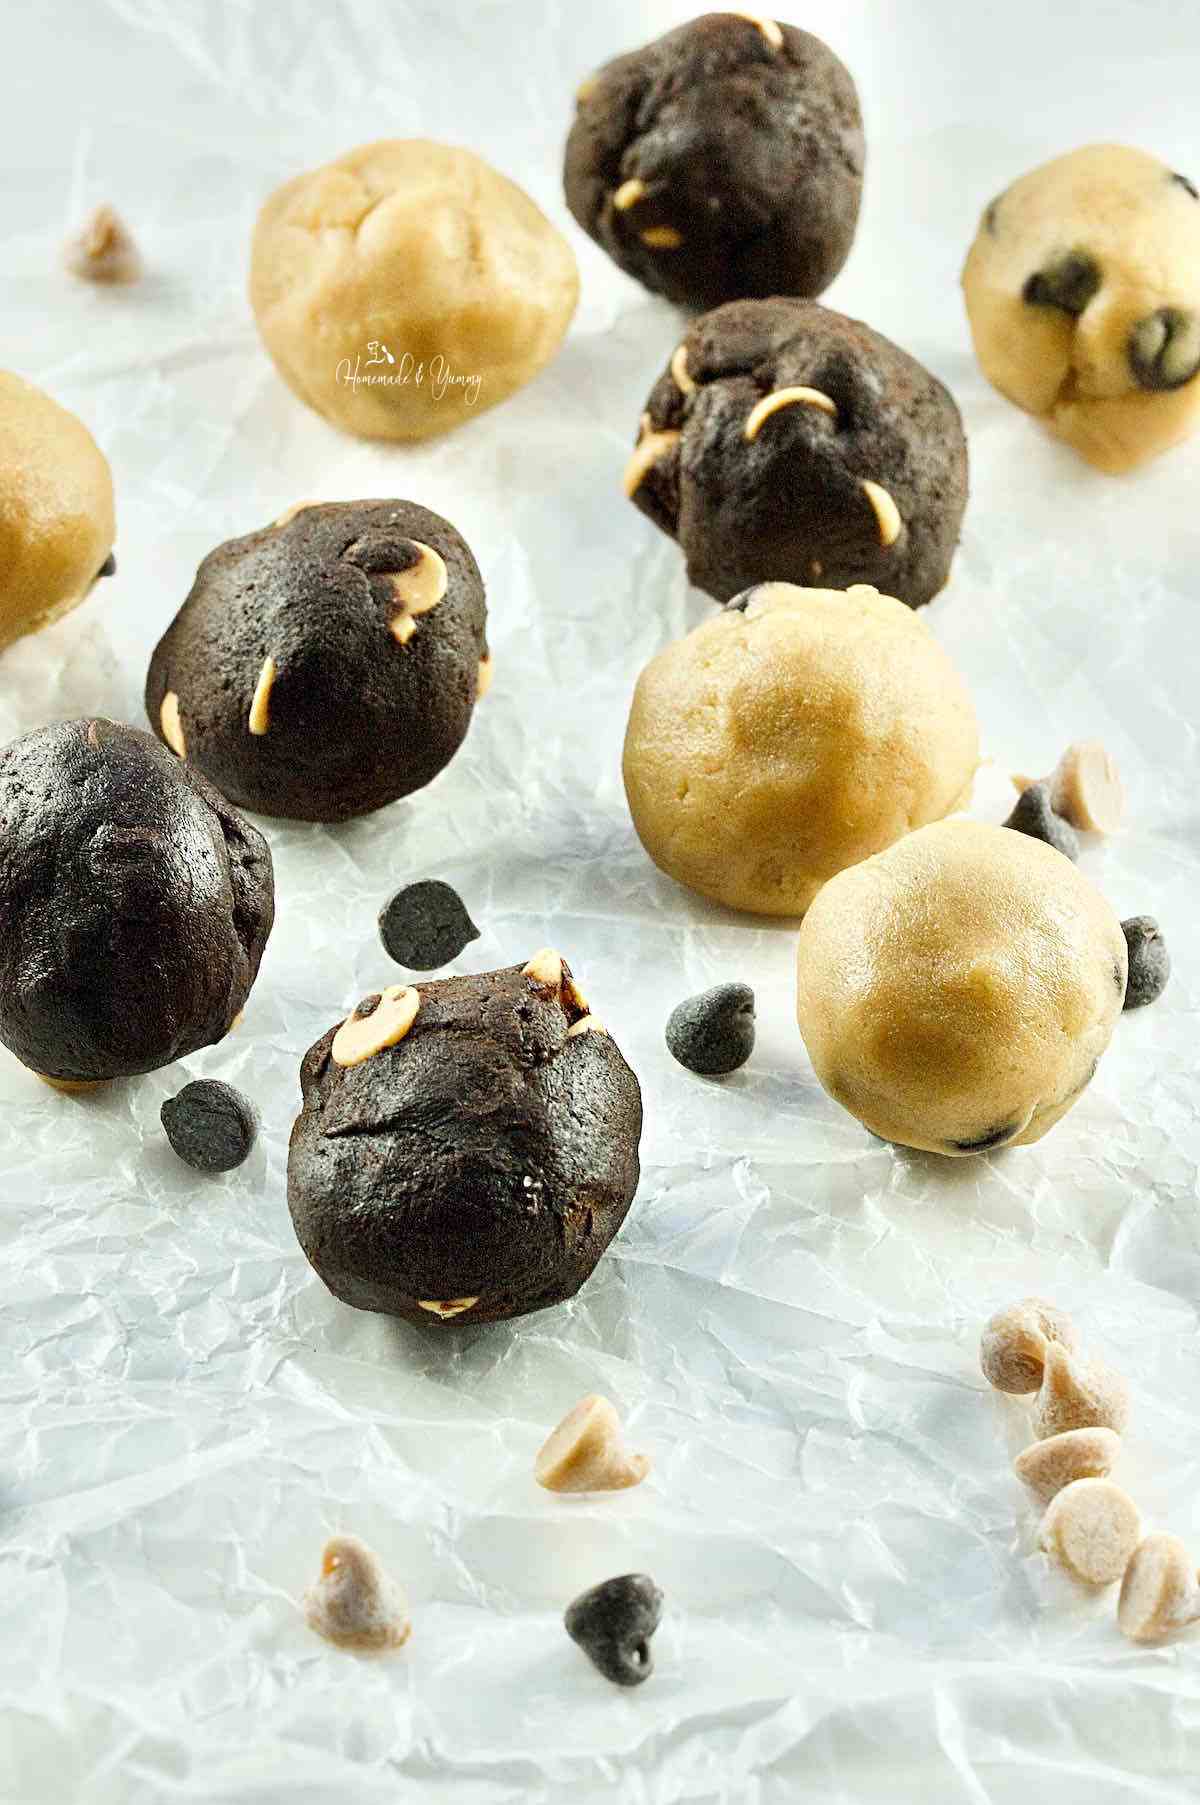 Peanut butter and chocolate cookies balls ready to blend together.